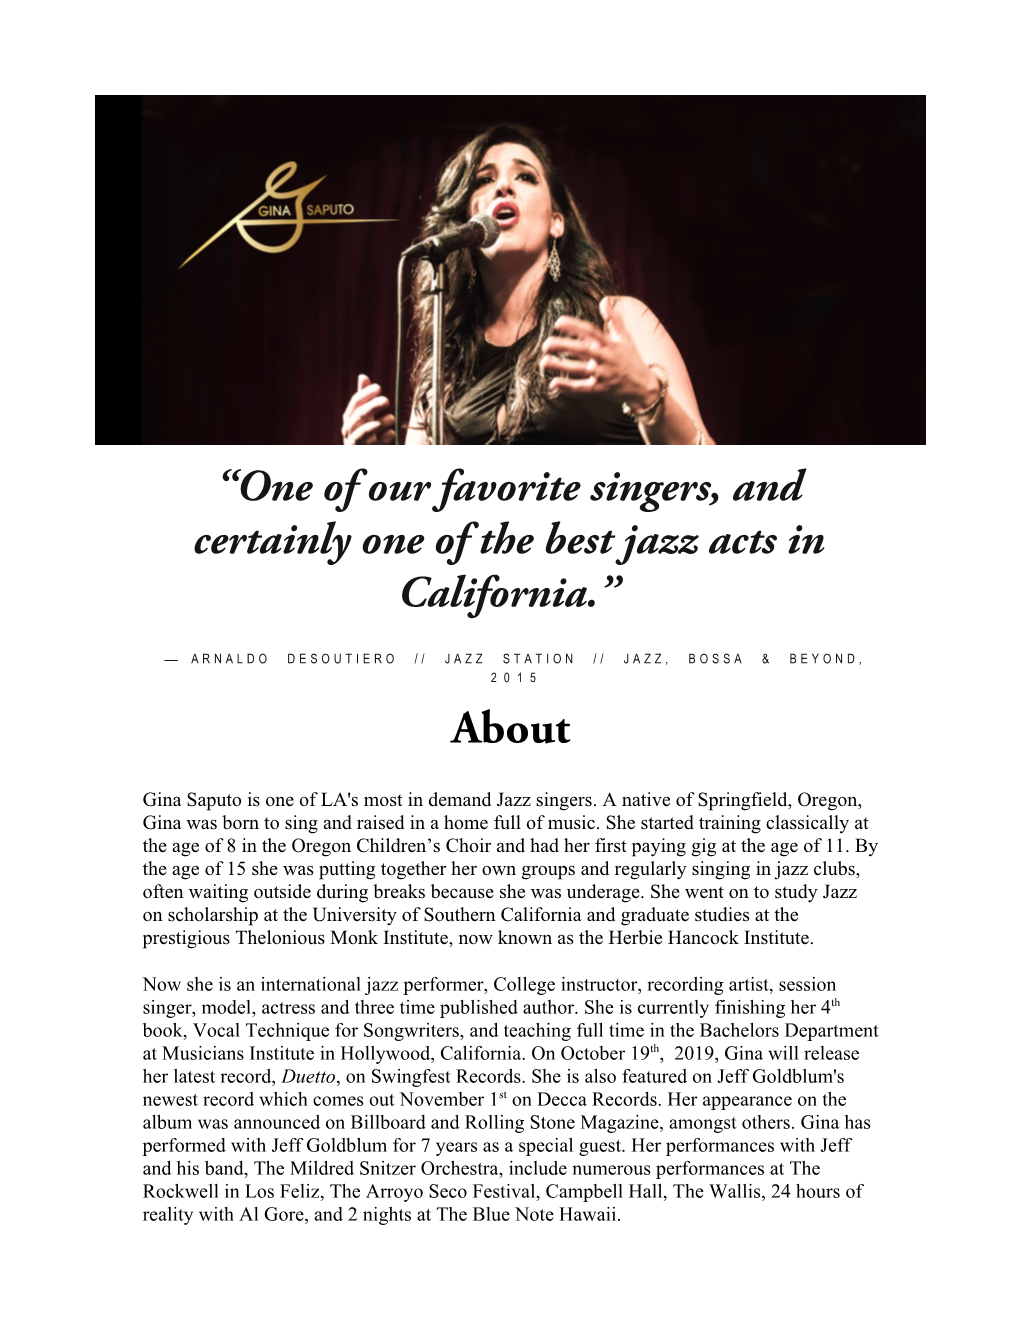 “One of Our Favorite Singers, and Certainly One of the Best Jazz Acts in California.”